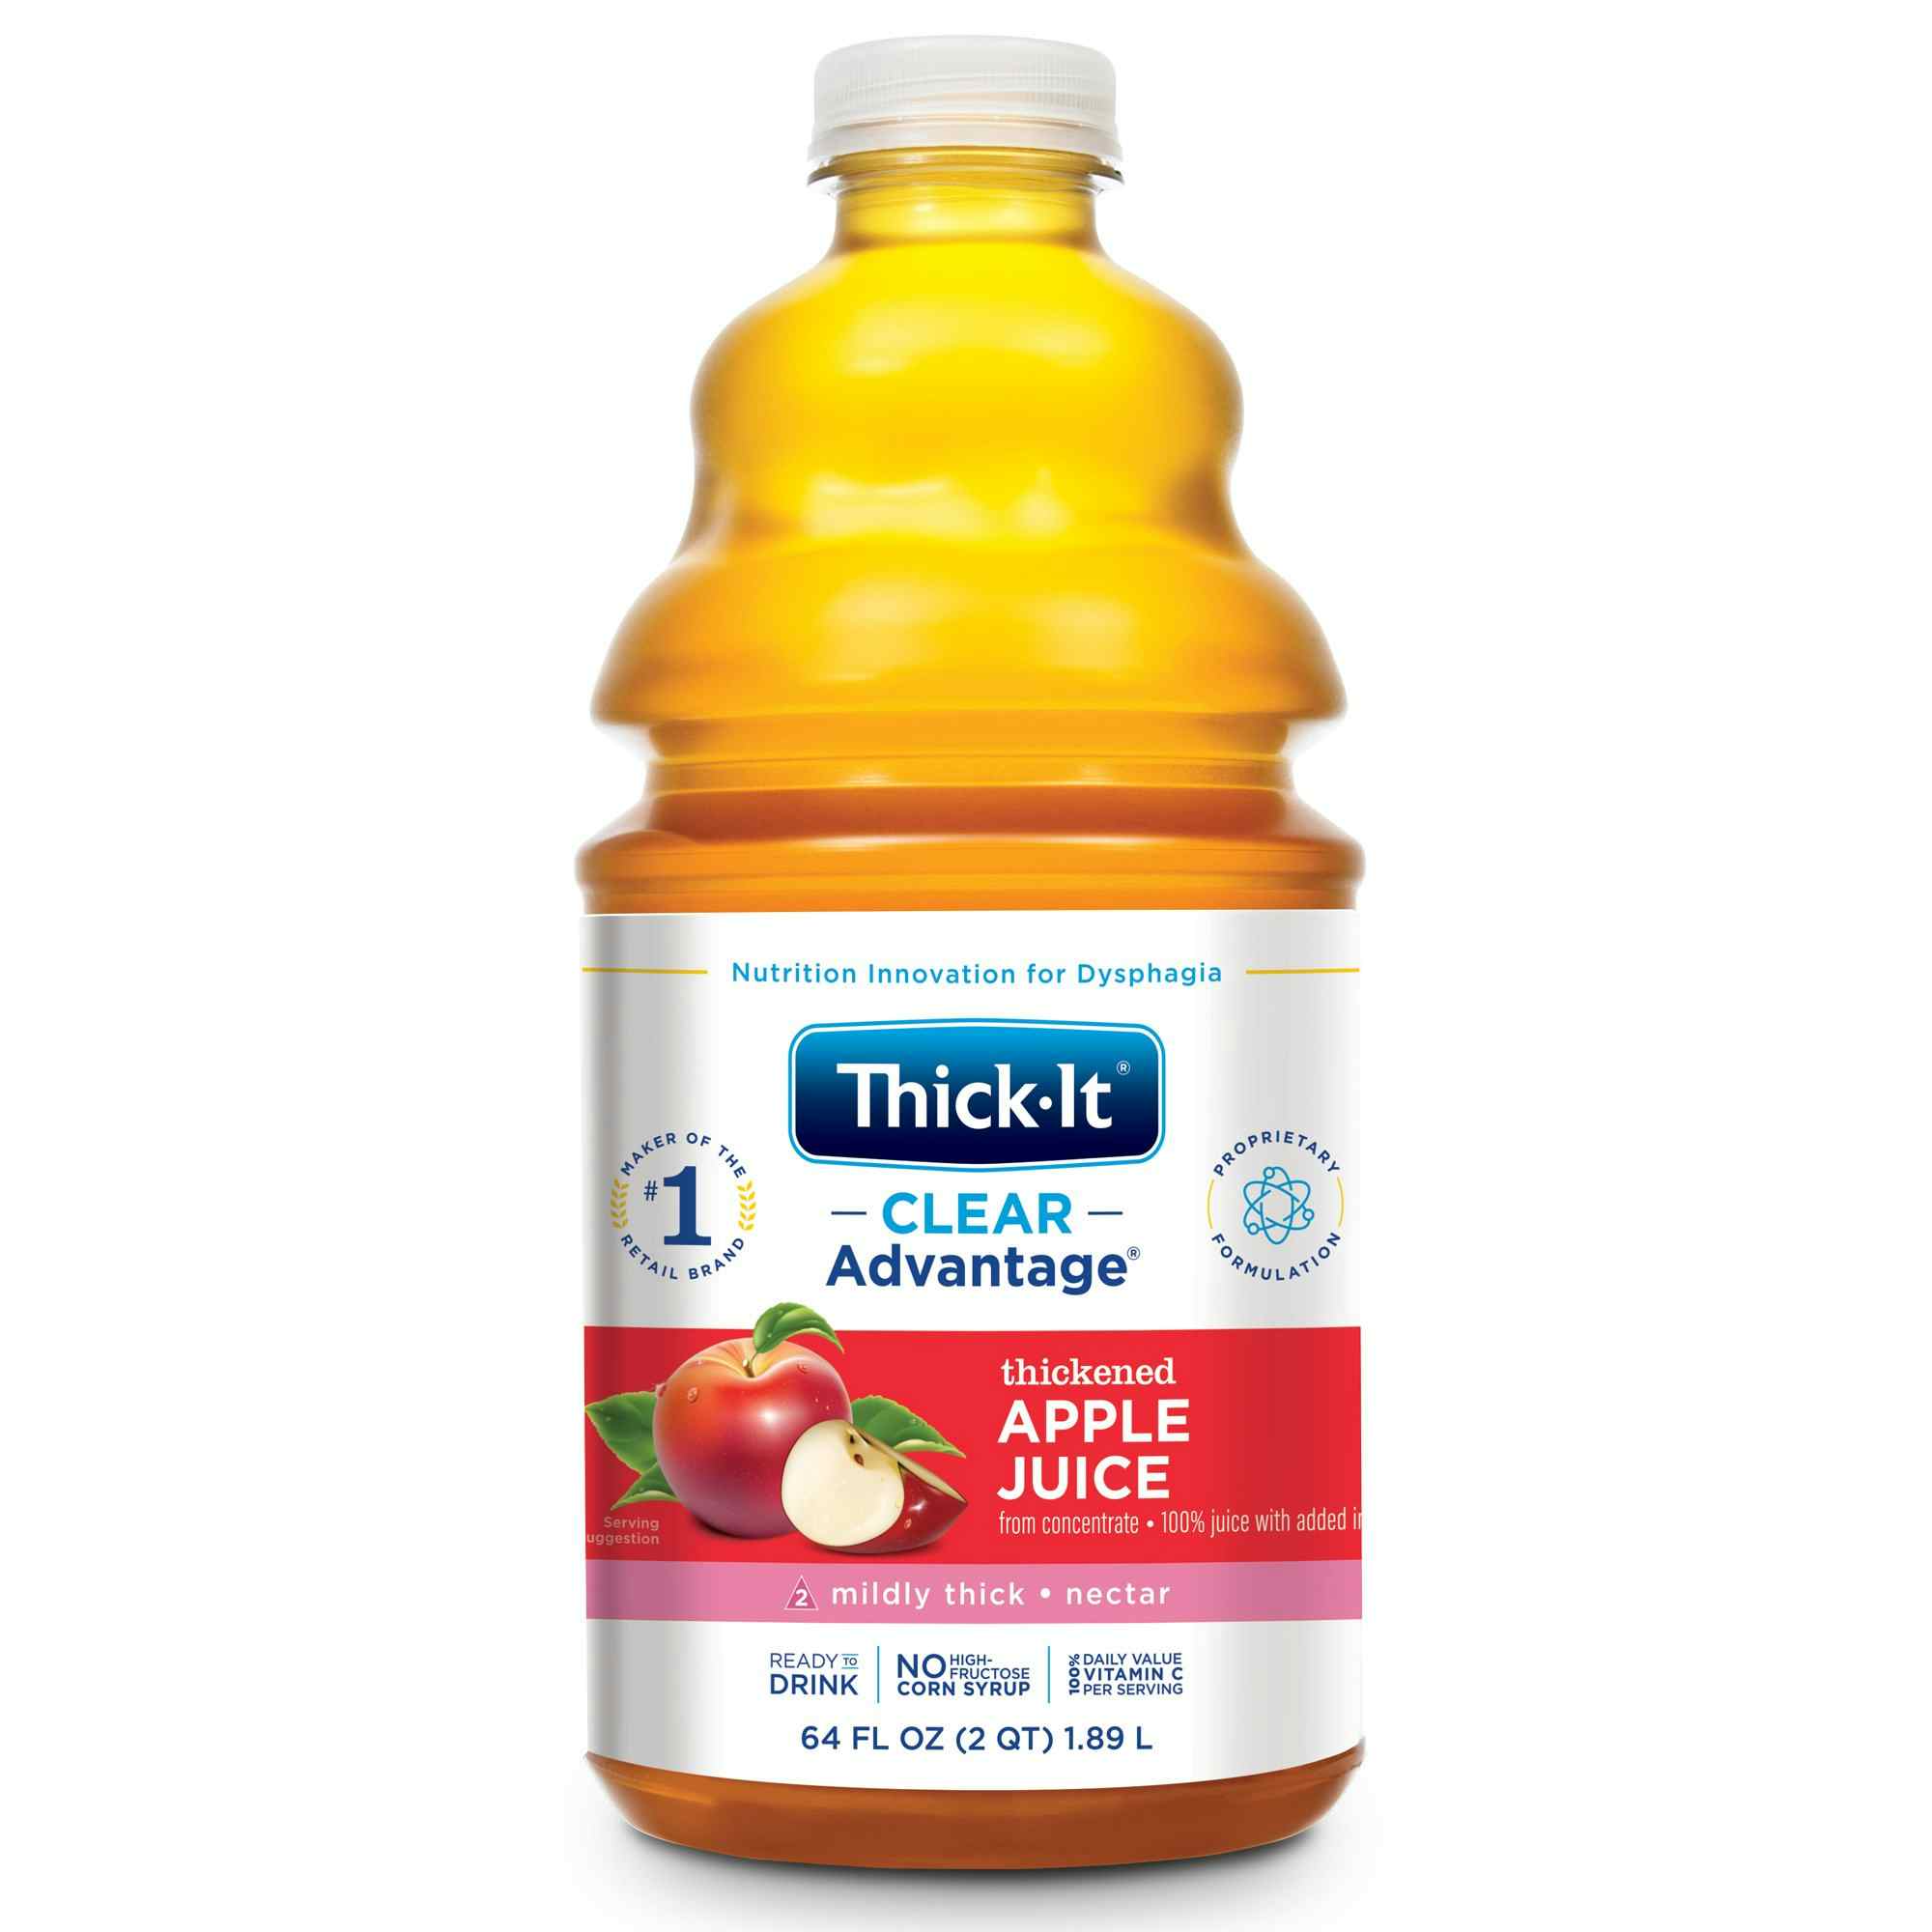 Thick-It Clear Advantage Thickened Apple Juice, Nectar Consistency, 64 oz., B454-A5044, 1 Each